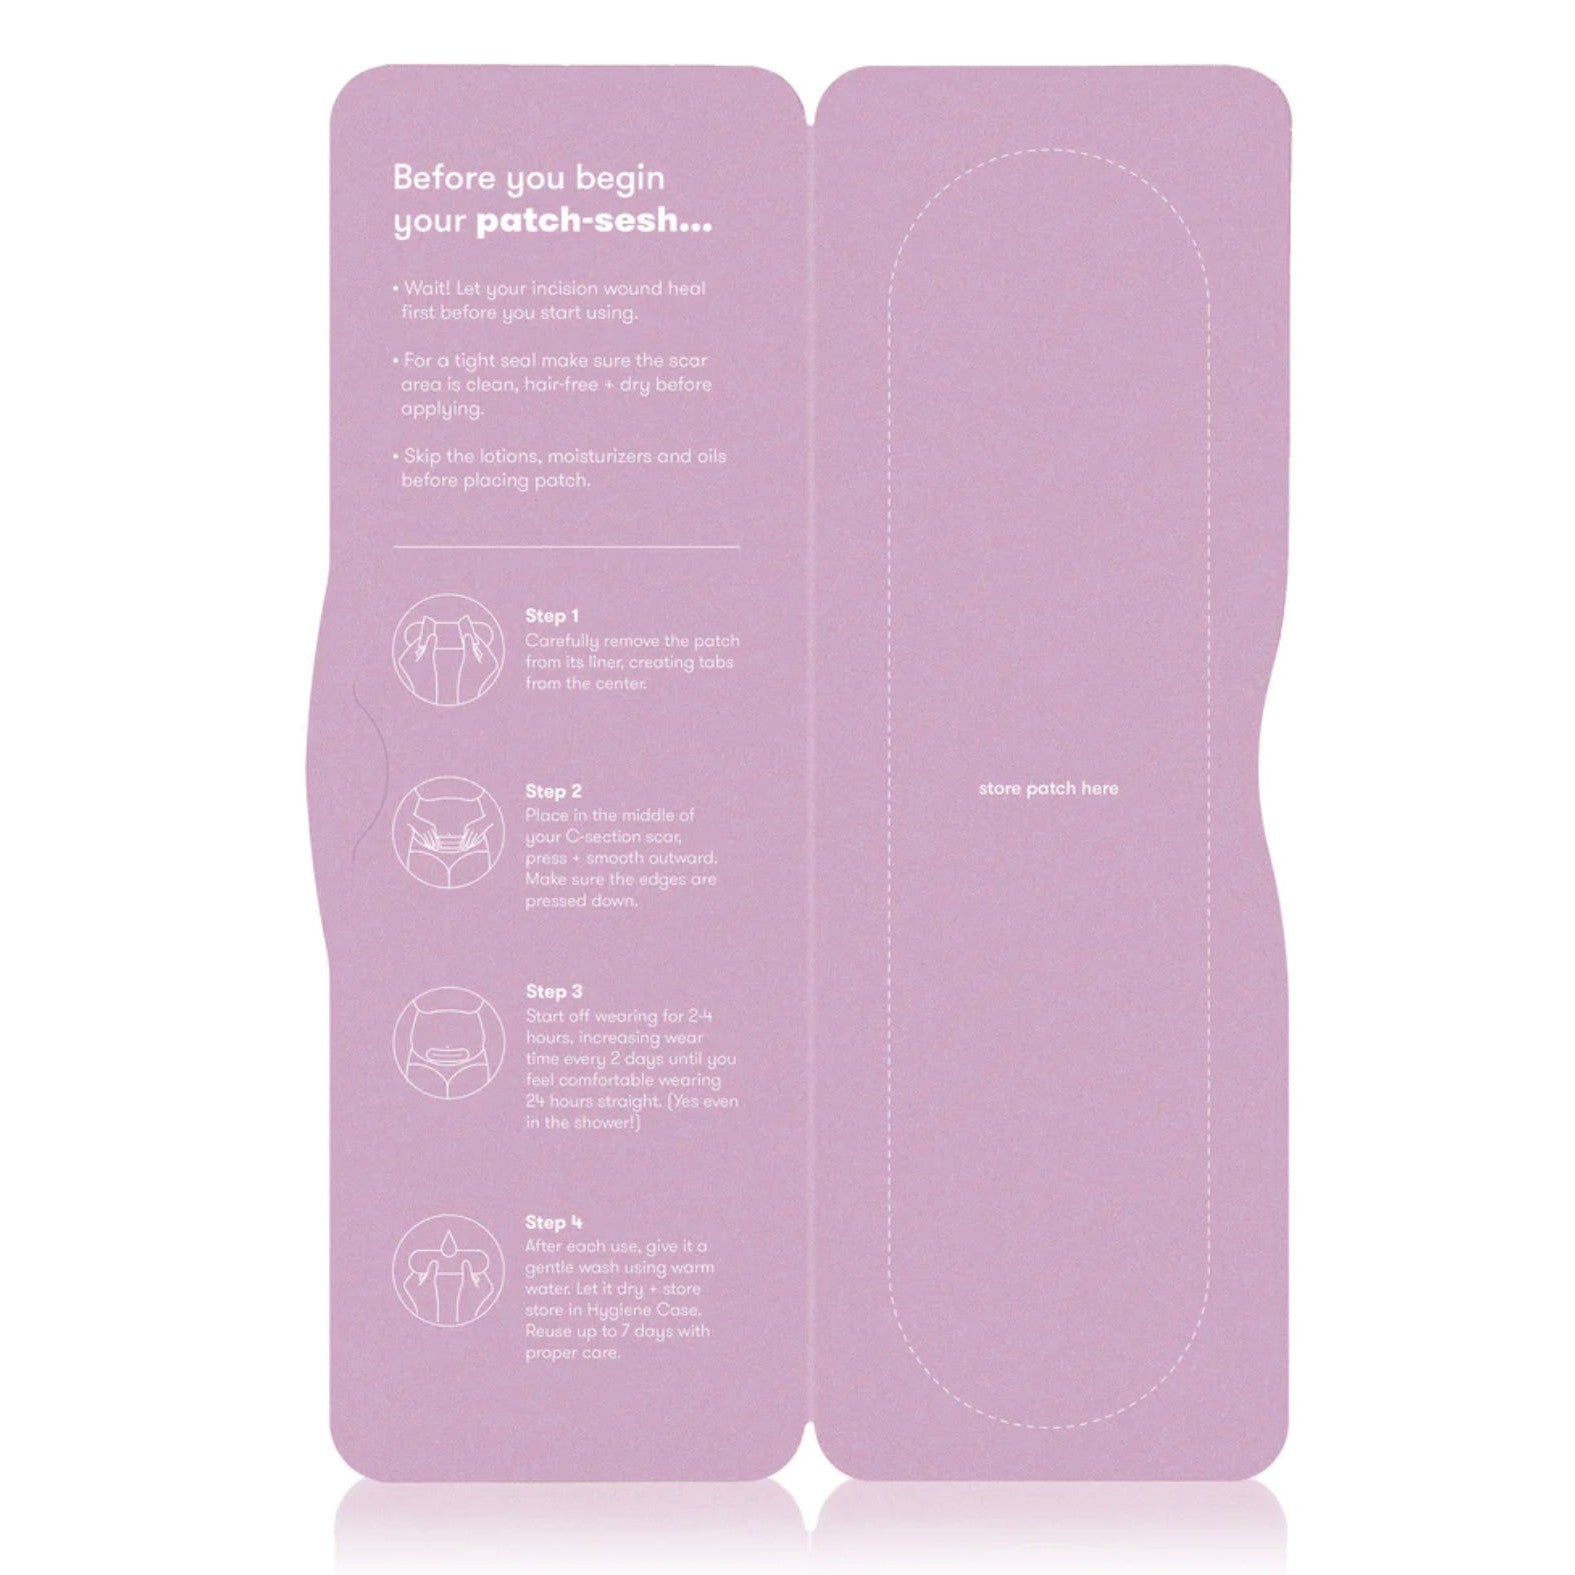 FridaBaby FridaMom C-Section Silicone Scar Patches